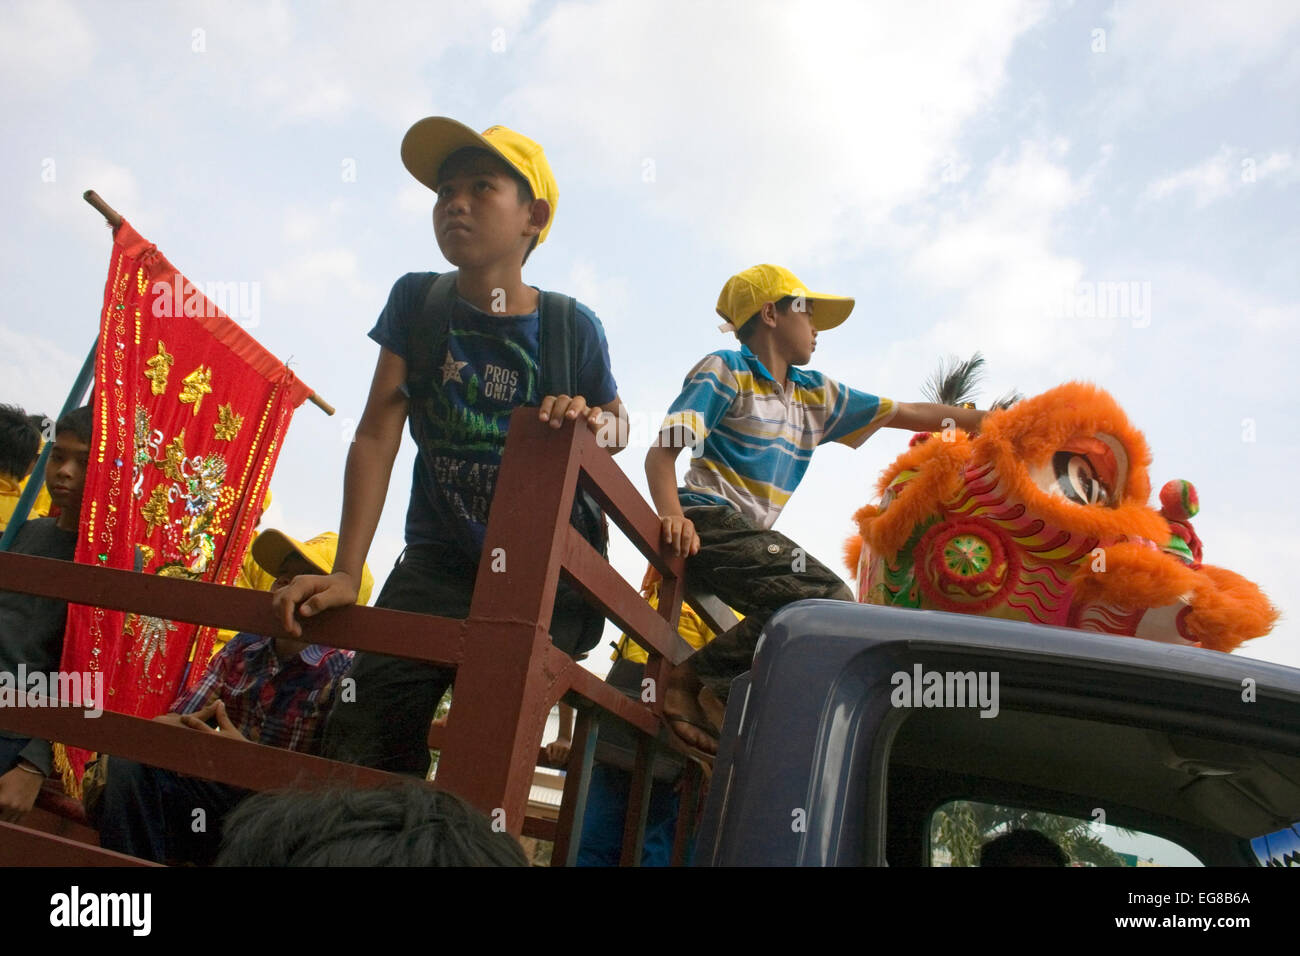 A group of young people are in a truck preparing to perform a show on Chinese New Year in Kampong Cham, Cambodia. Stock Photo